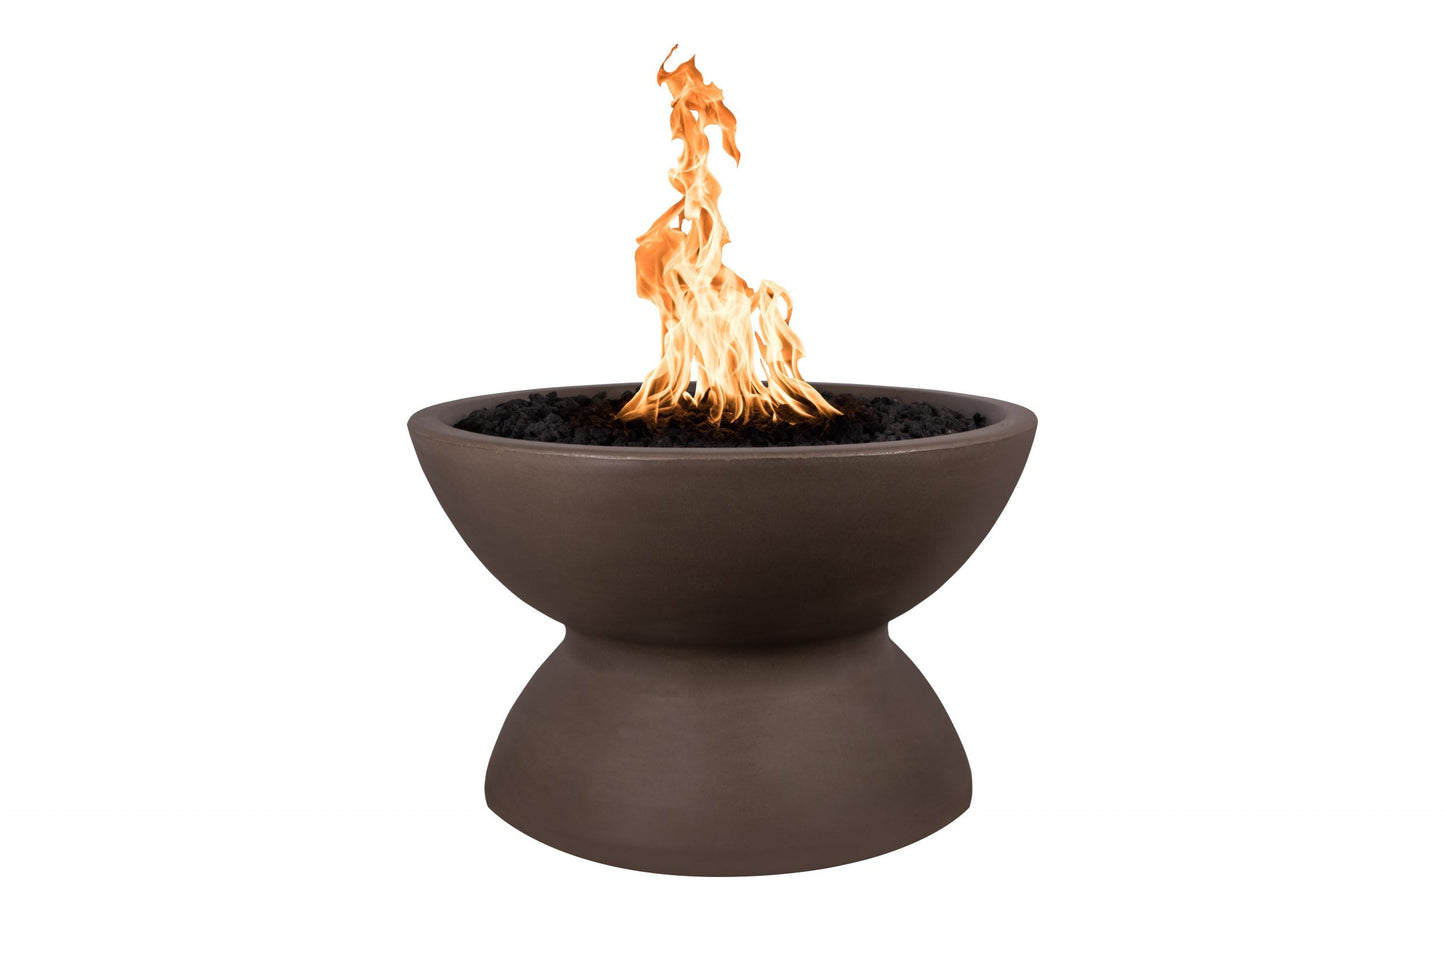 The Outdoor Plus Round Copa 33" Metallic Copper GFRC Concrete Liquid Propane Fire Pit with 110V Electronic Ignition